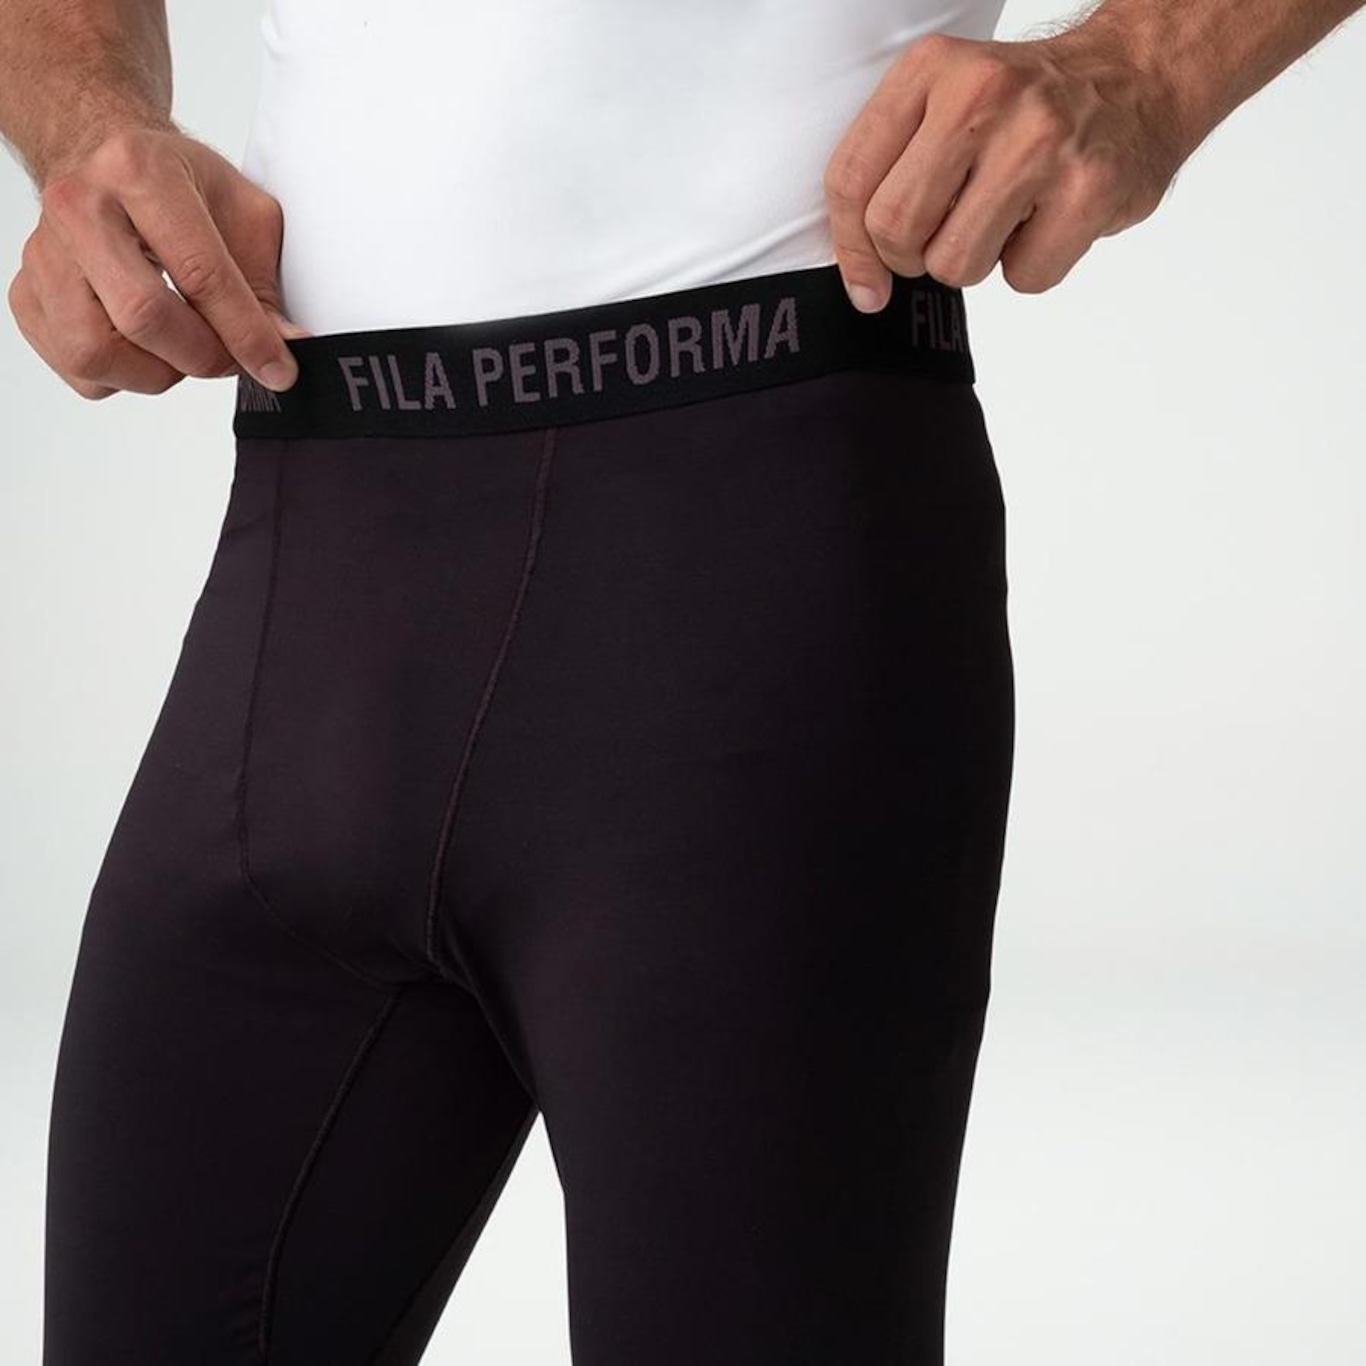 Barra Performance Compression Pants by Adidas - Black